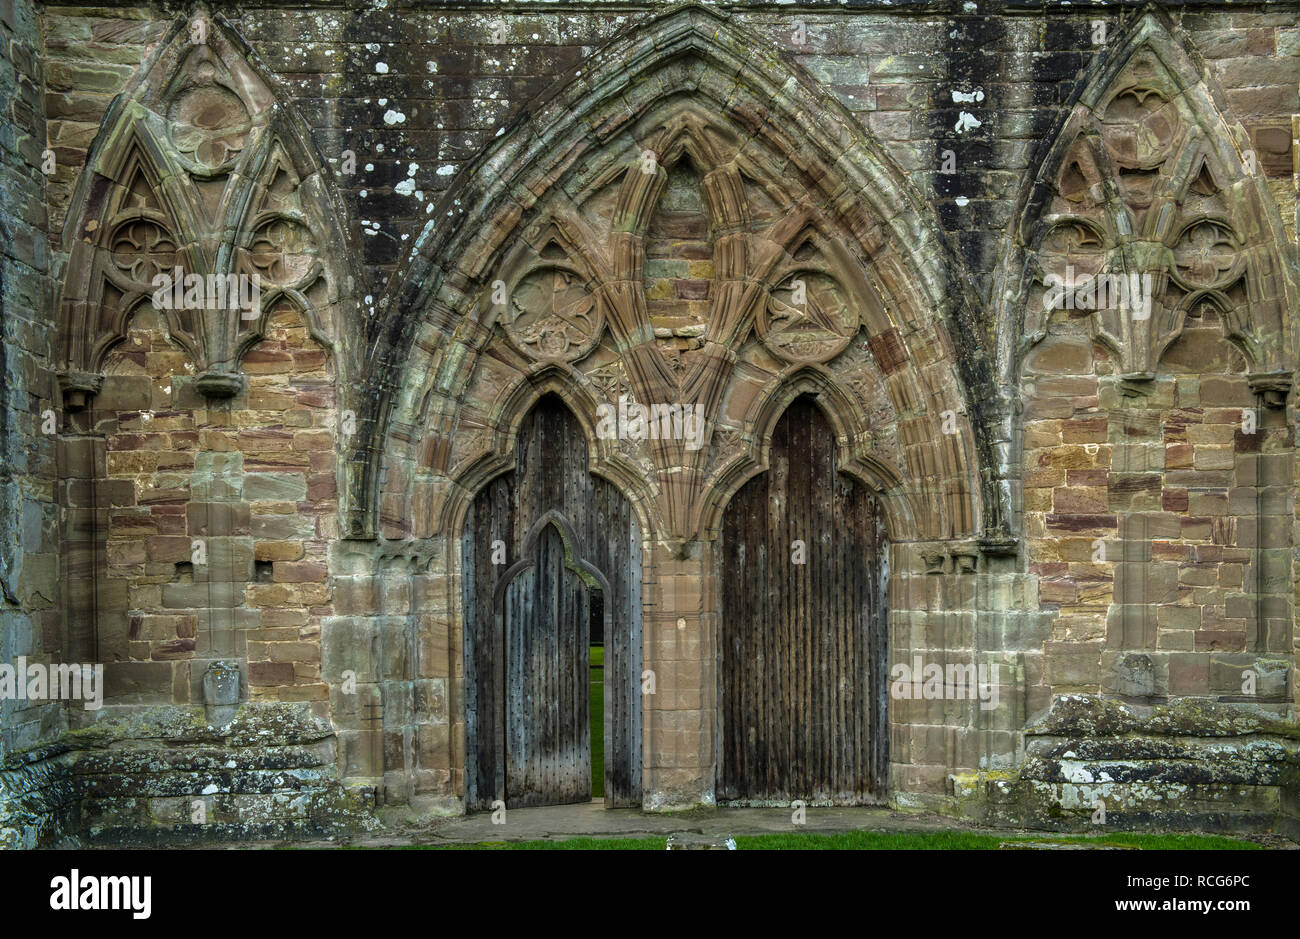 The east end of Tintern Abbey Wye Valley, up close. Beautifully carved sandstone arches. Stock Photo